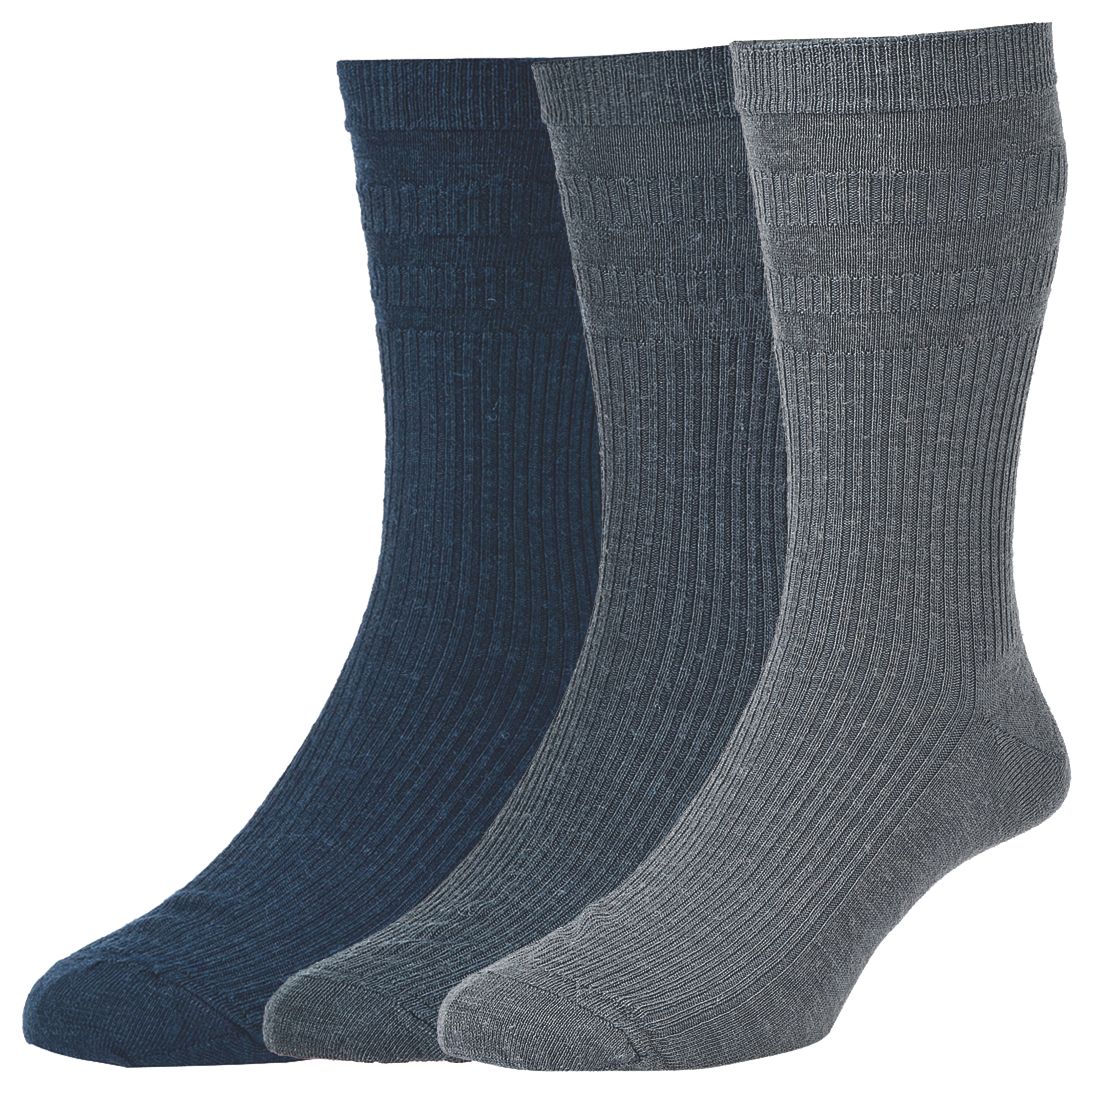 Buy HJ Hall Wool Soft Top Socks, Pack of 3, One Size Online at johnlewis.com